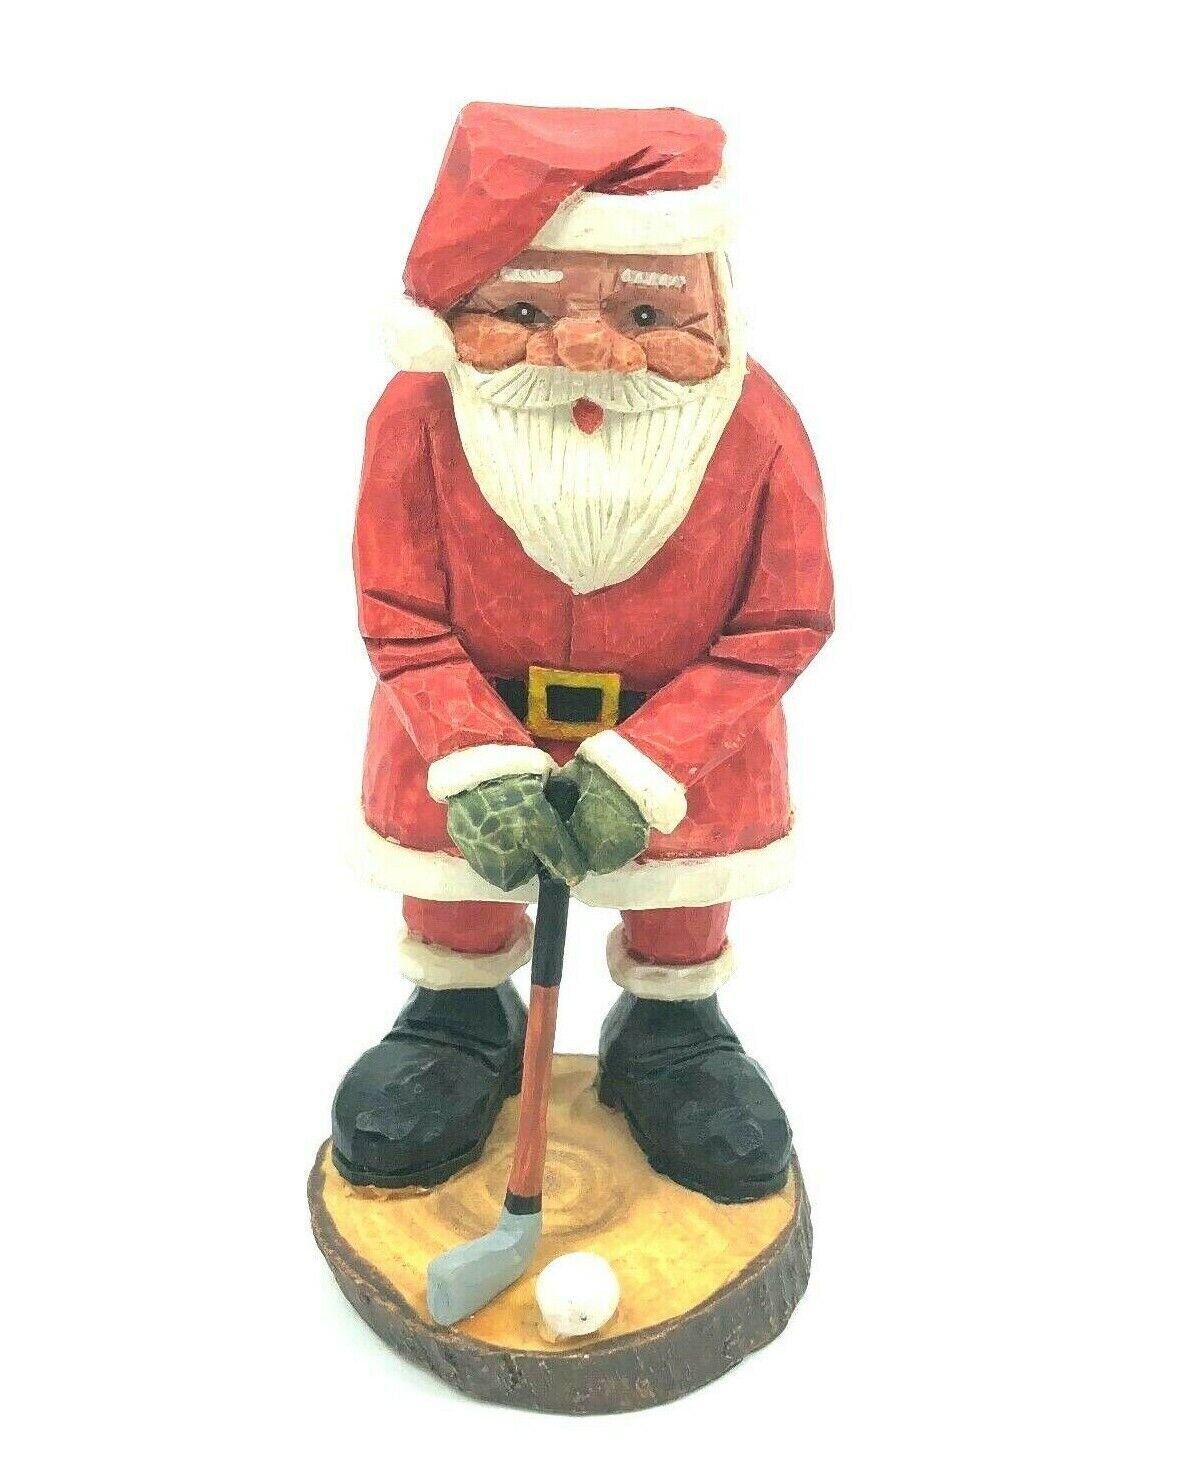 Santa Claus Christmas Figurine Playing Golf Sport Golfing Figure Resin 5 inches